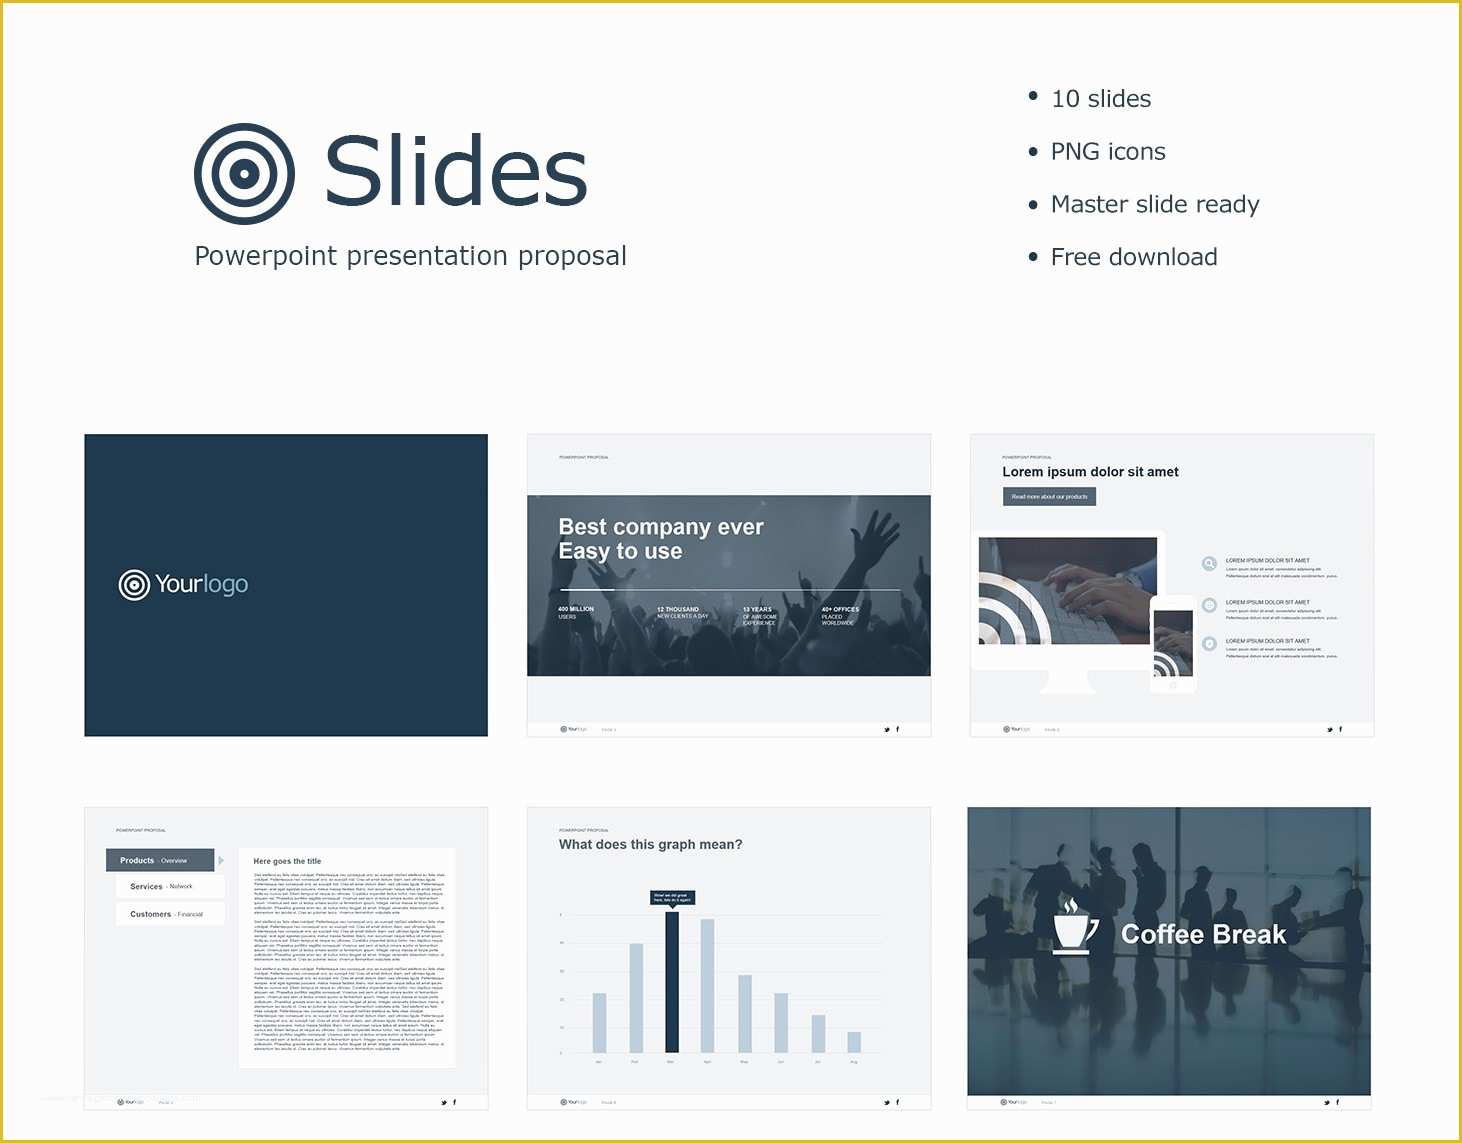 Free Presentation Templates Of 40 Free Cool Powerpoint Templates for Presentations